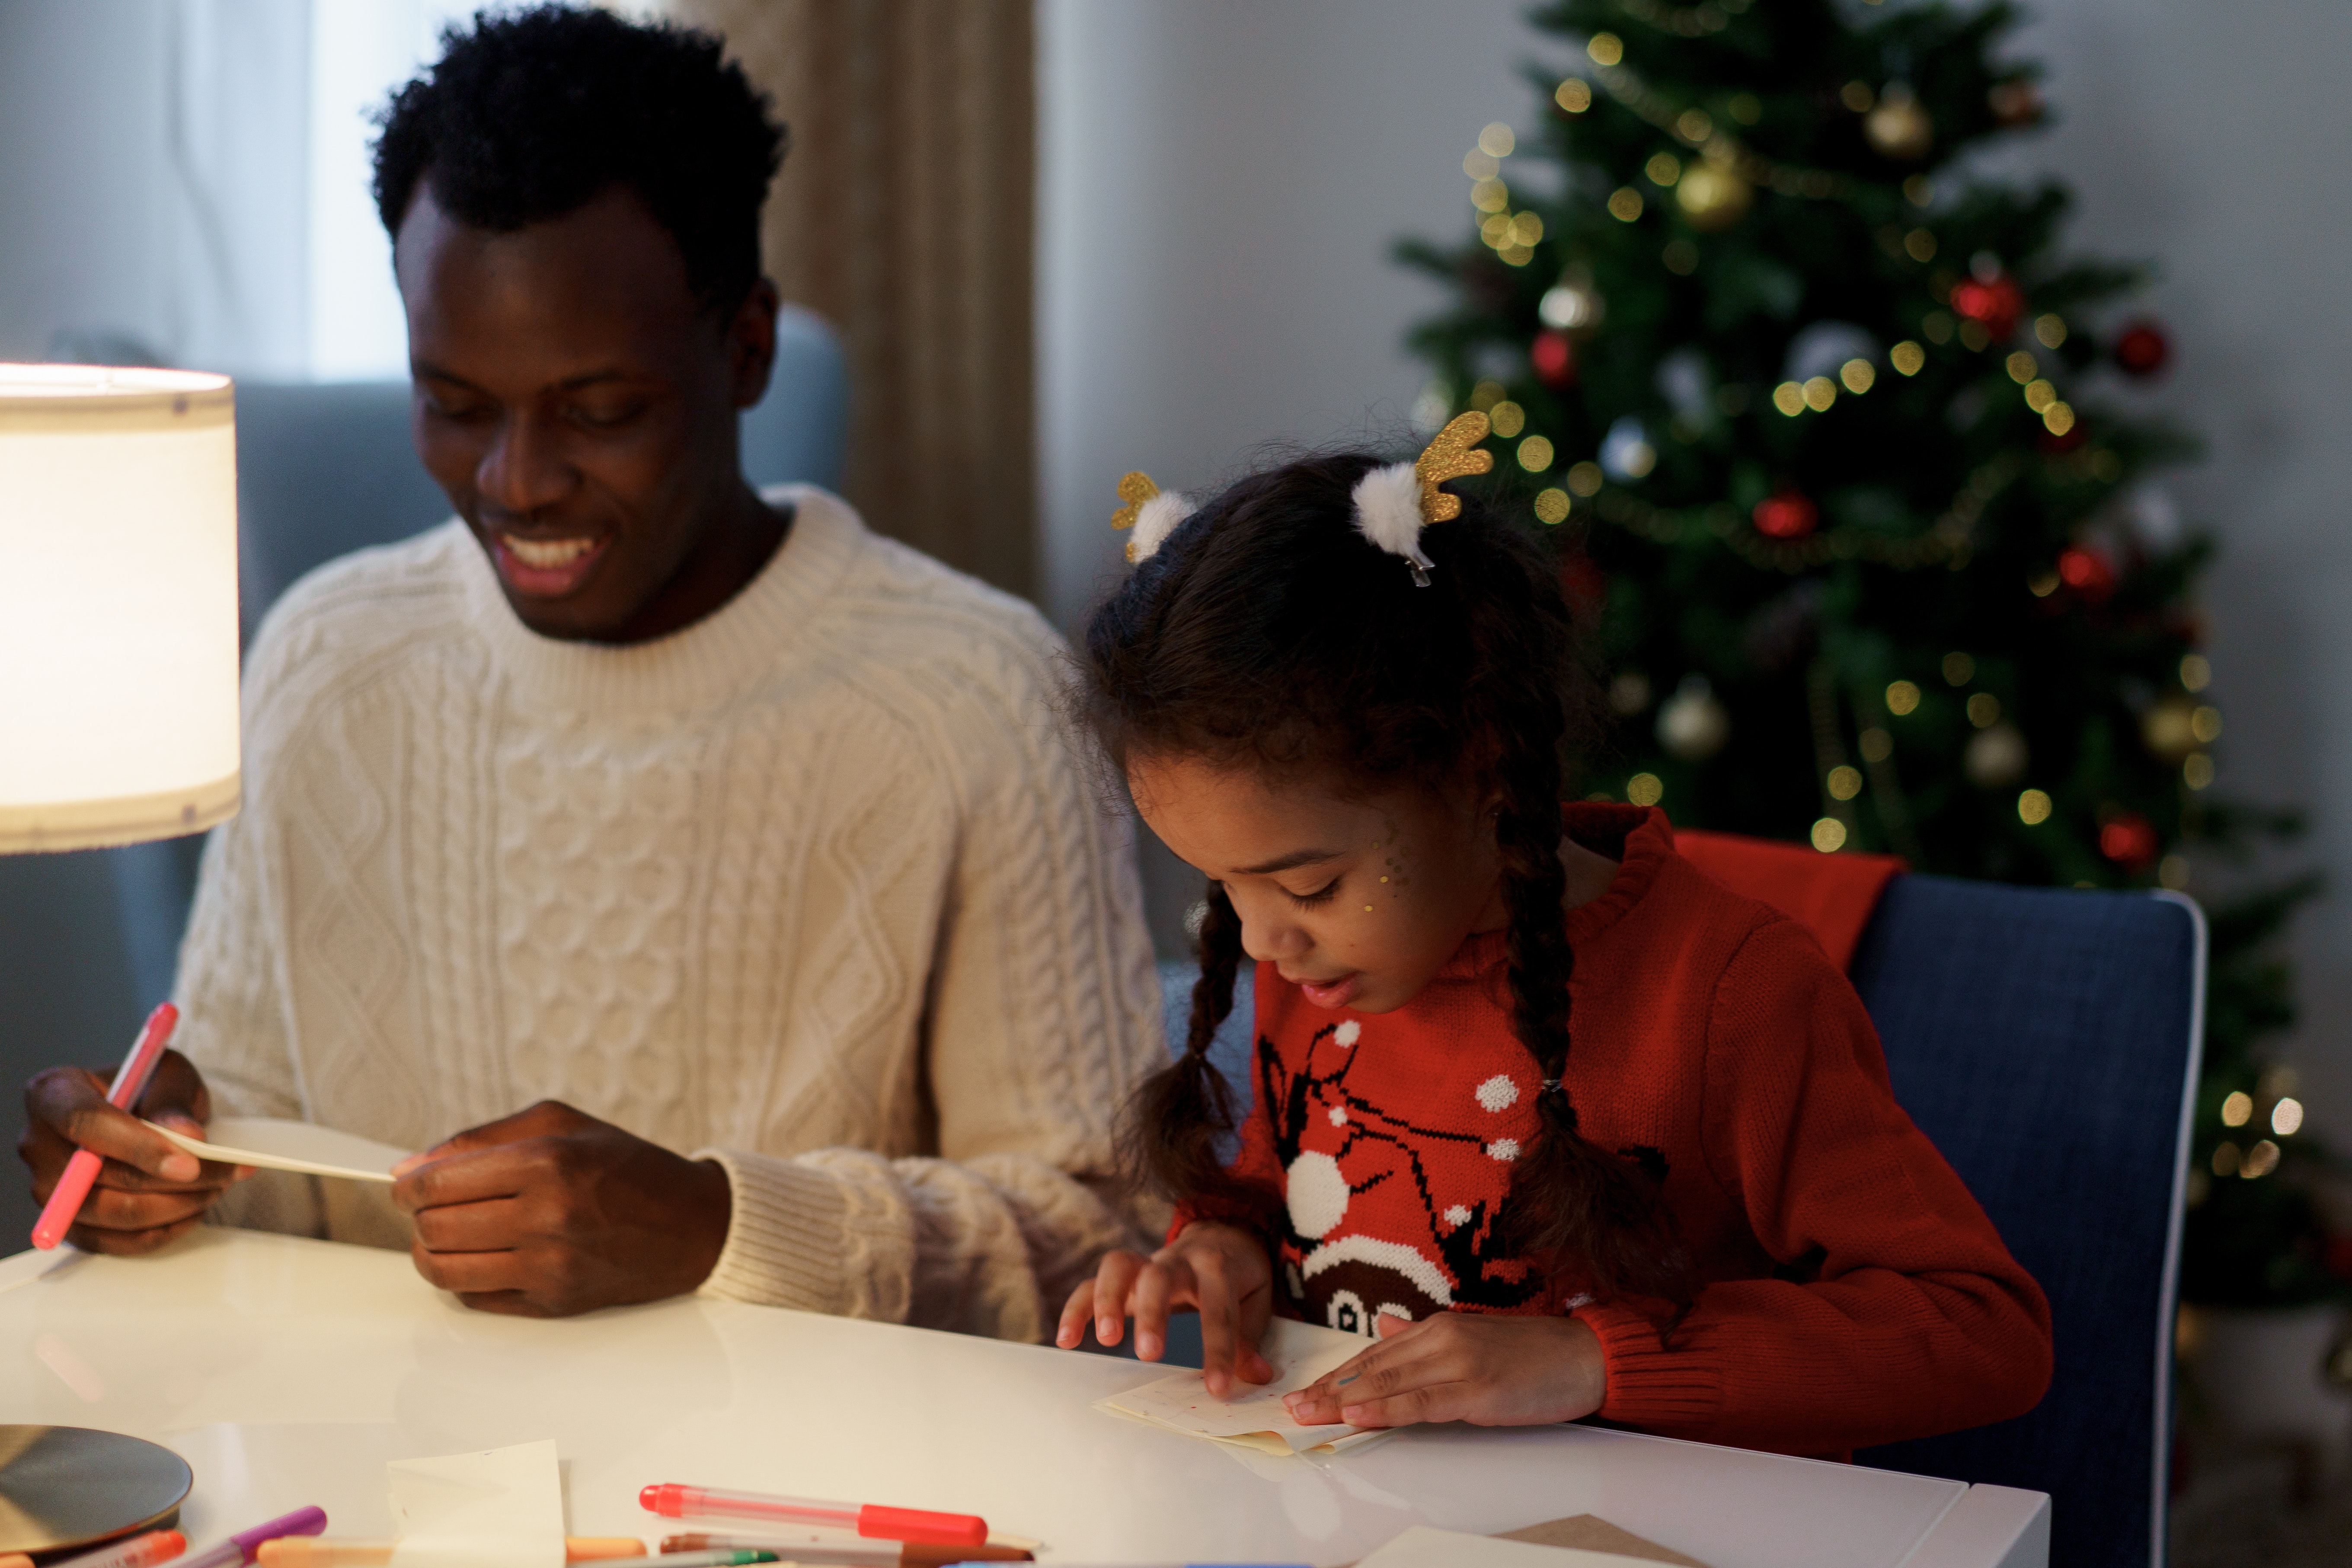 Father and daughter making a card. Photo by cottonbro studio: https://www.pexels.com/photo/dad-and-daughter-making-a-christmas-letter-6140240/